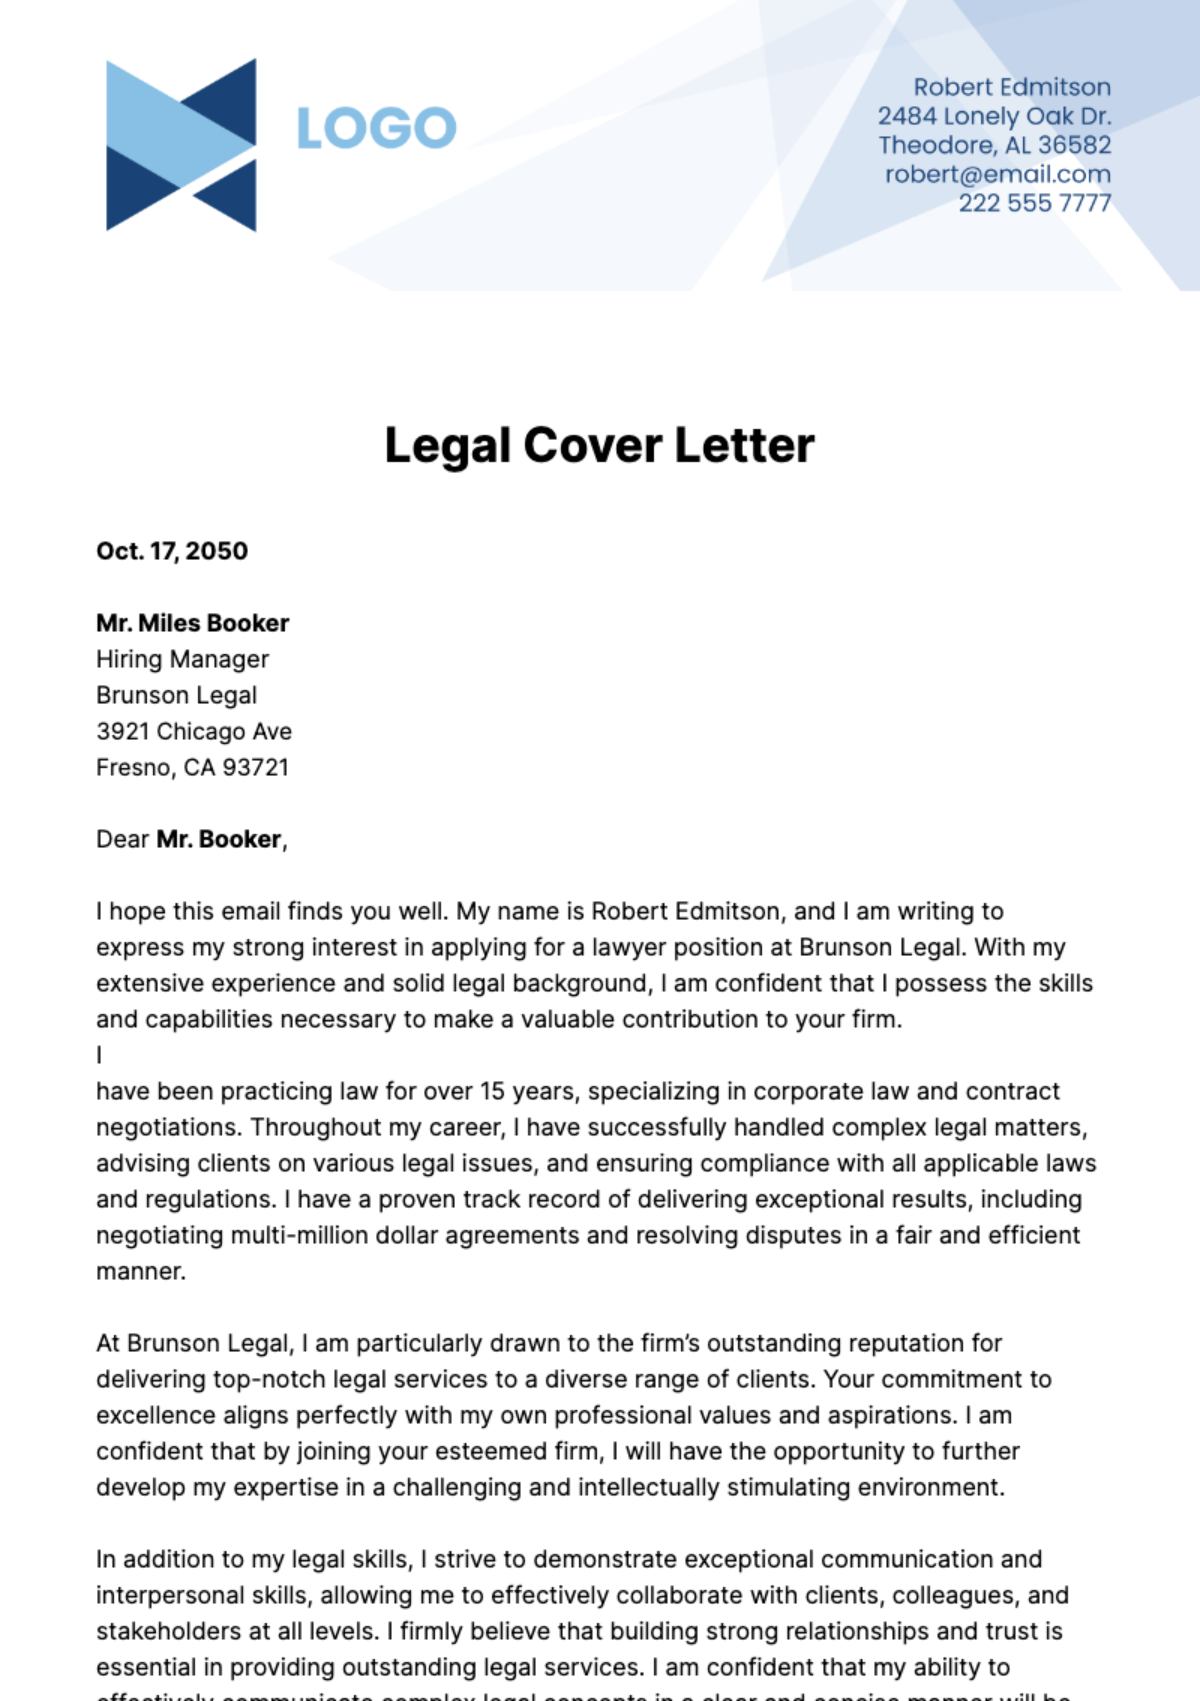 Free Legal Cover Letter  Template